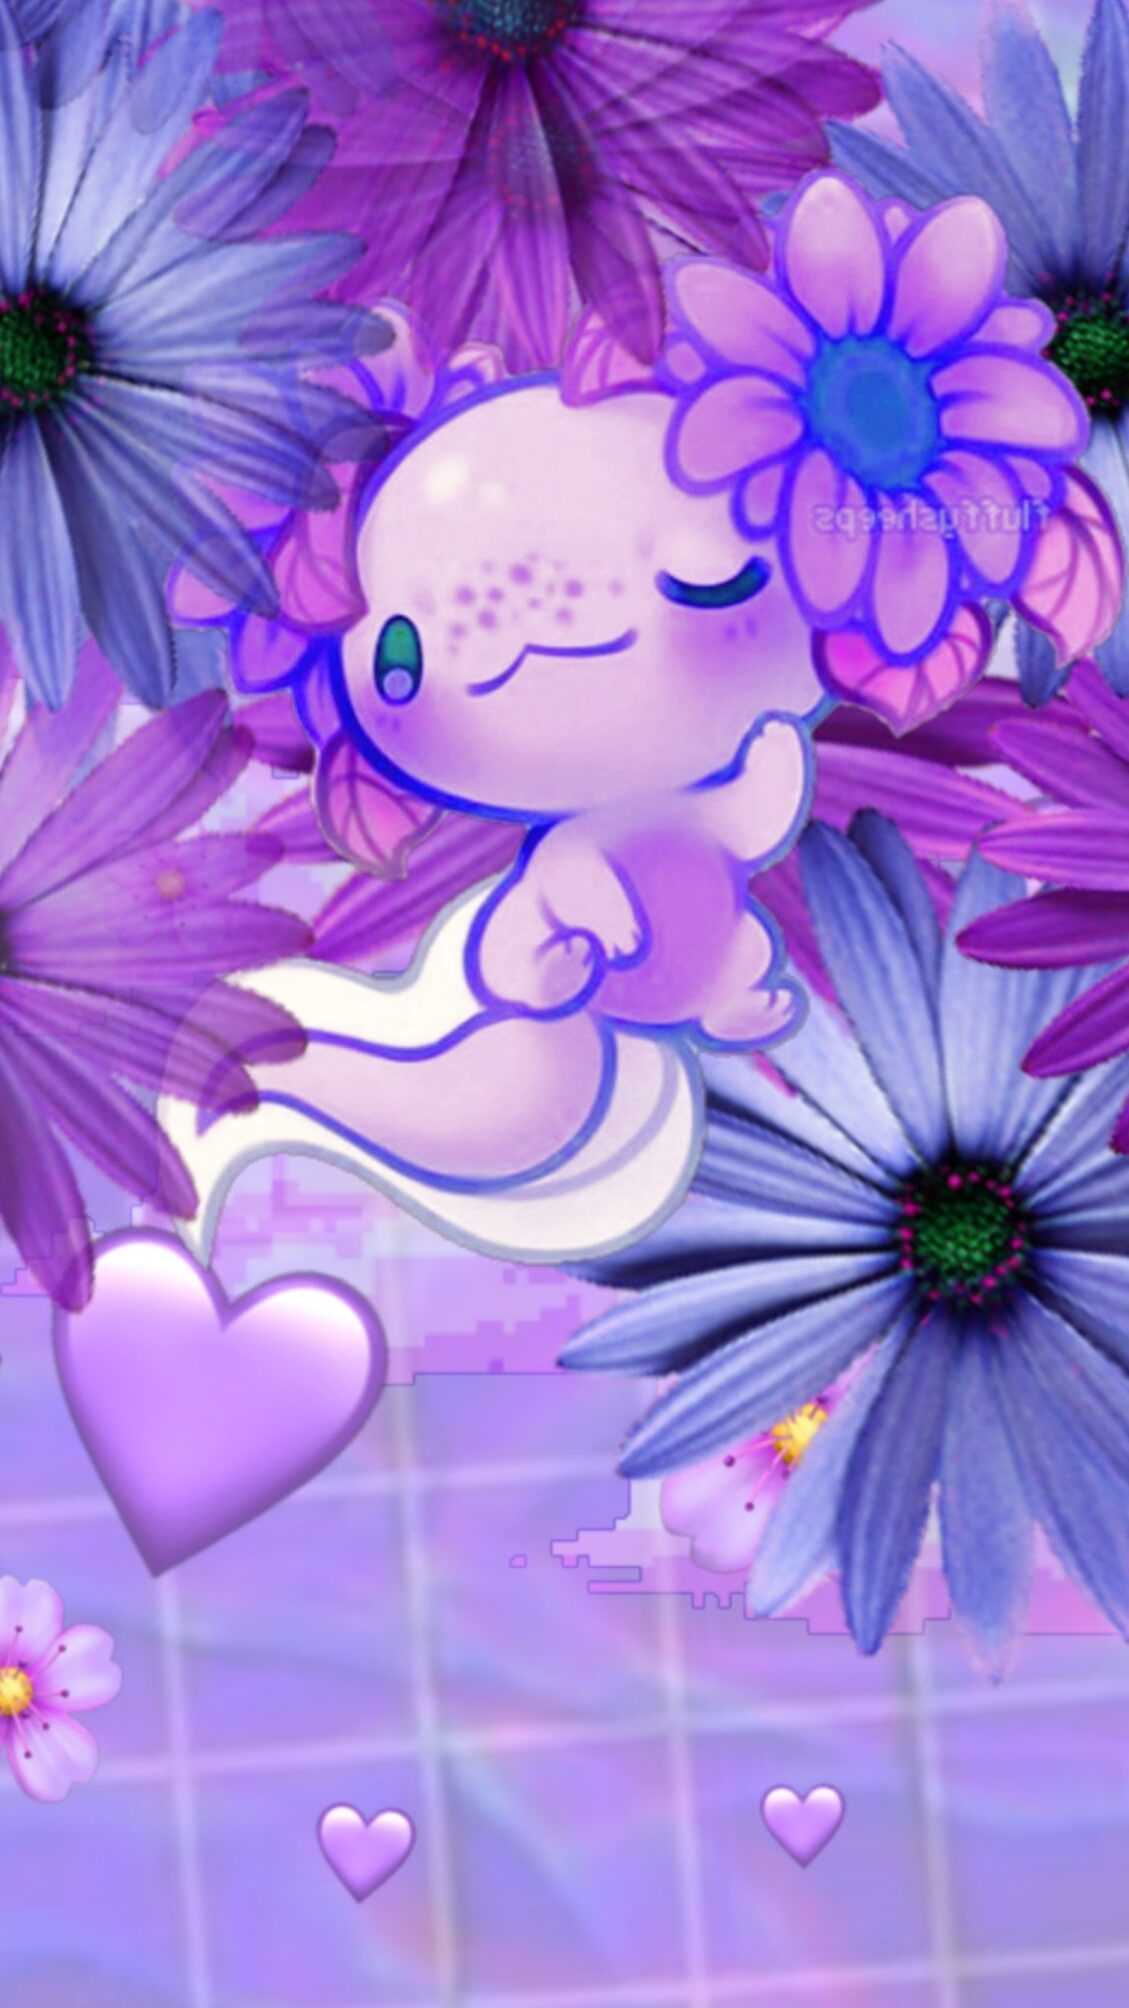 A cute little girl with purple flowers and hearts - Axolotl, purple